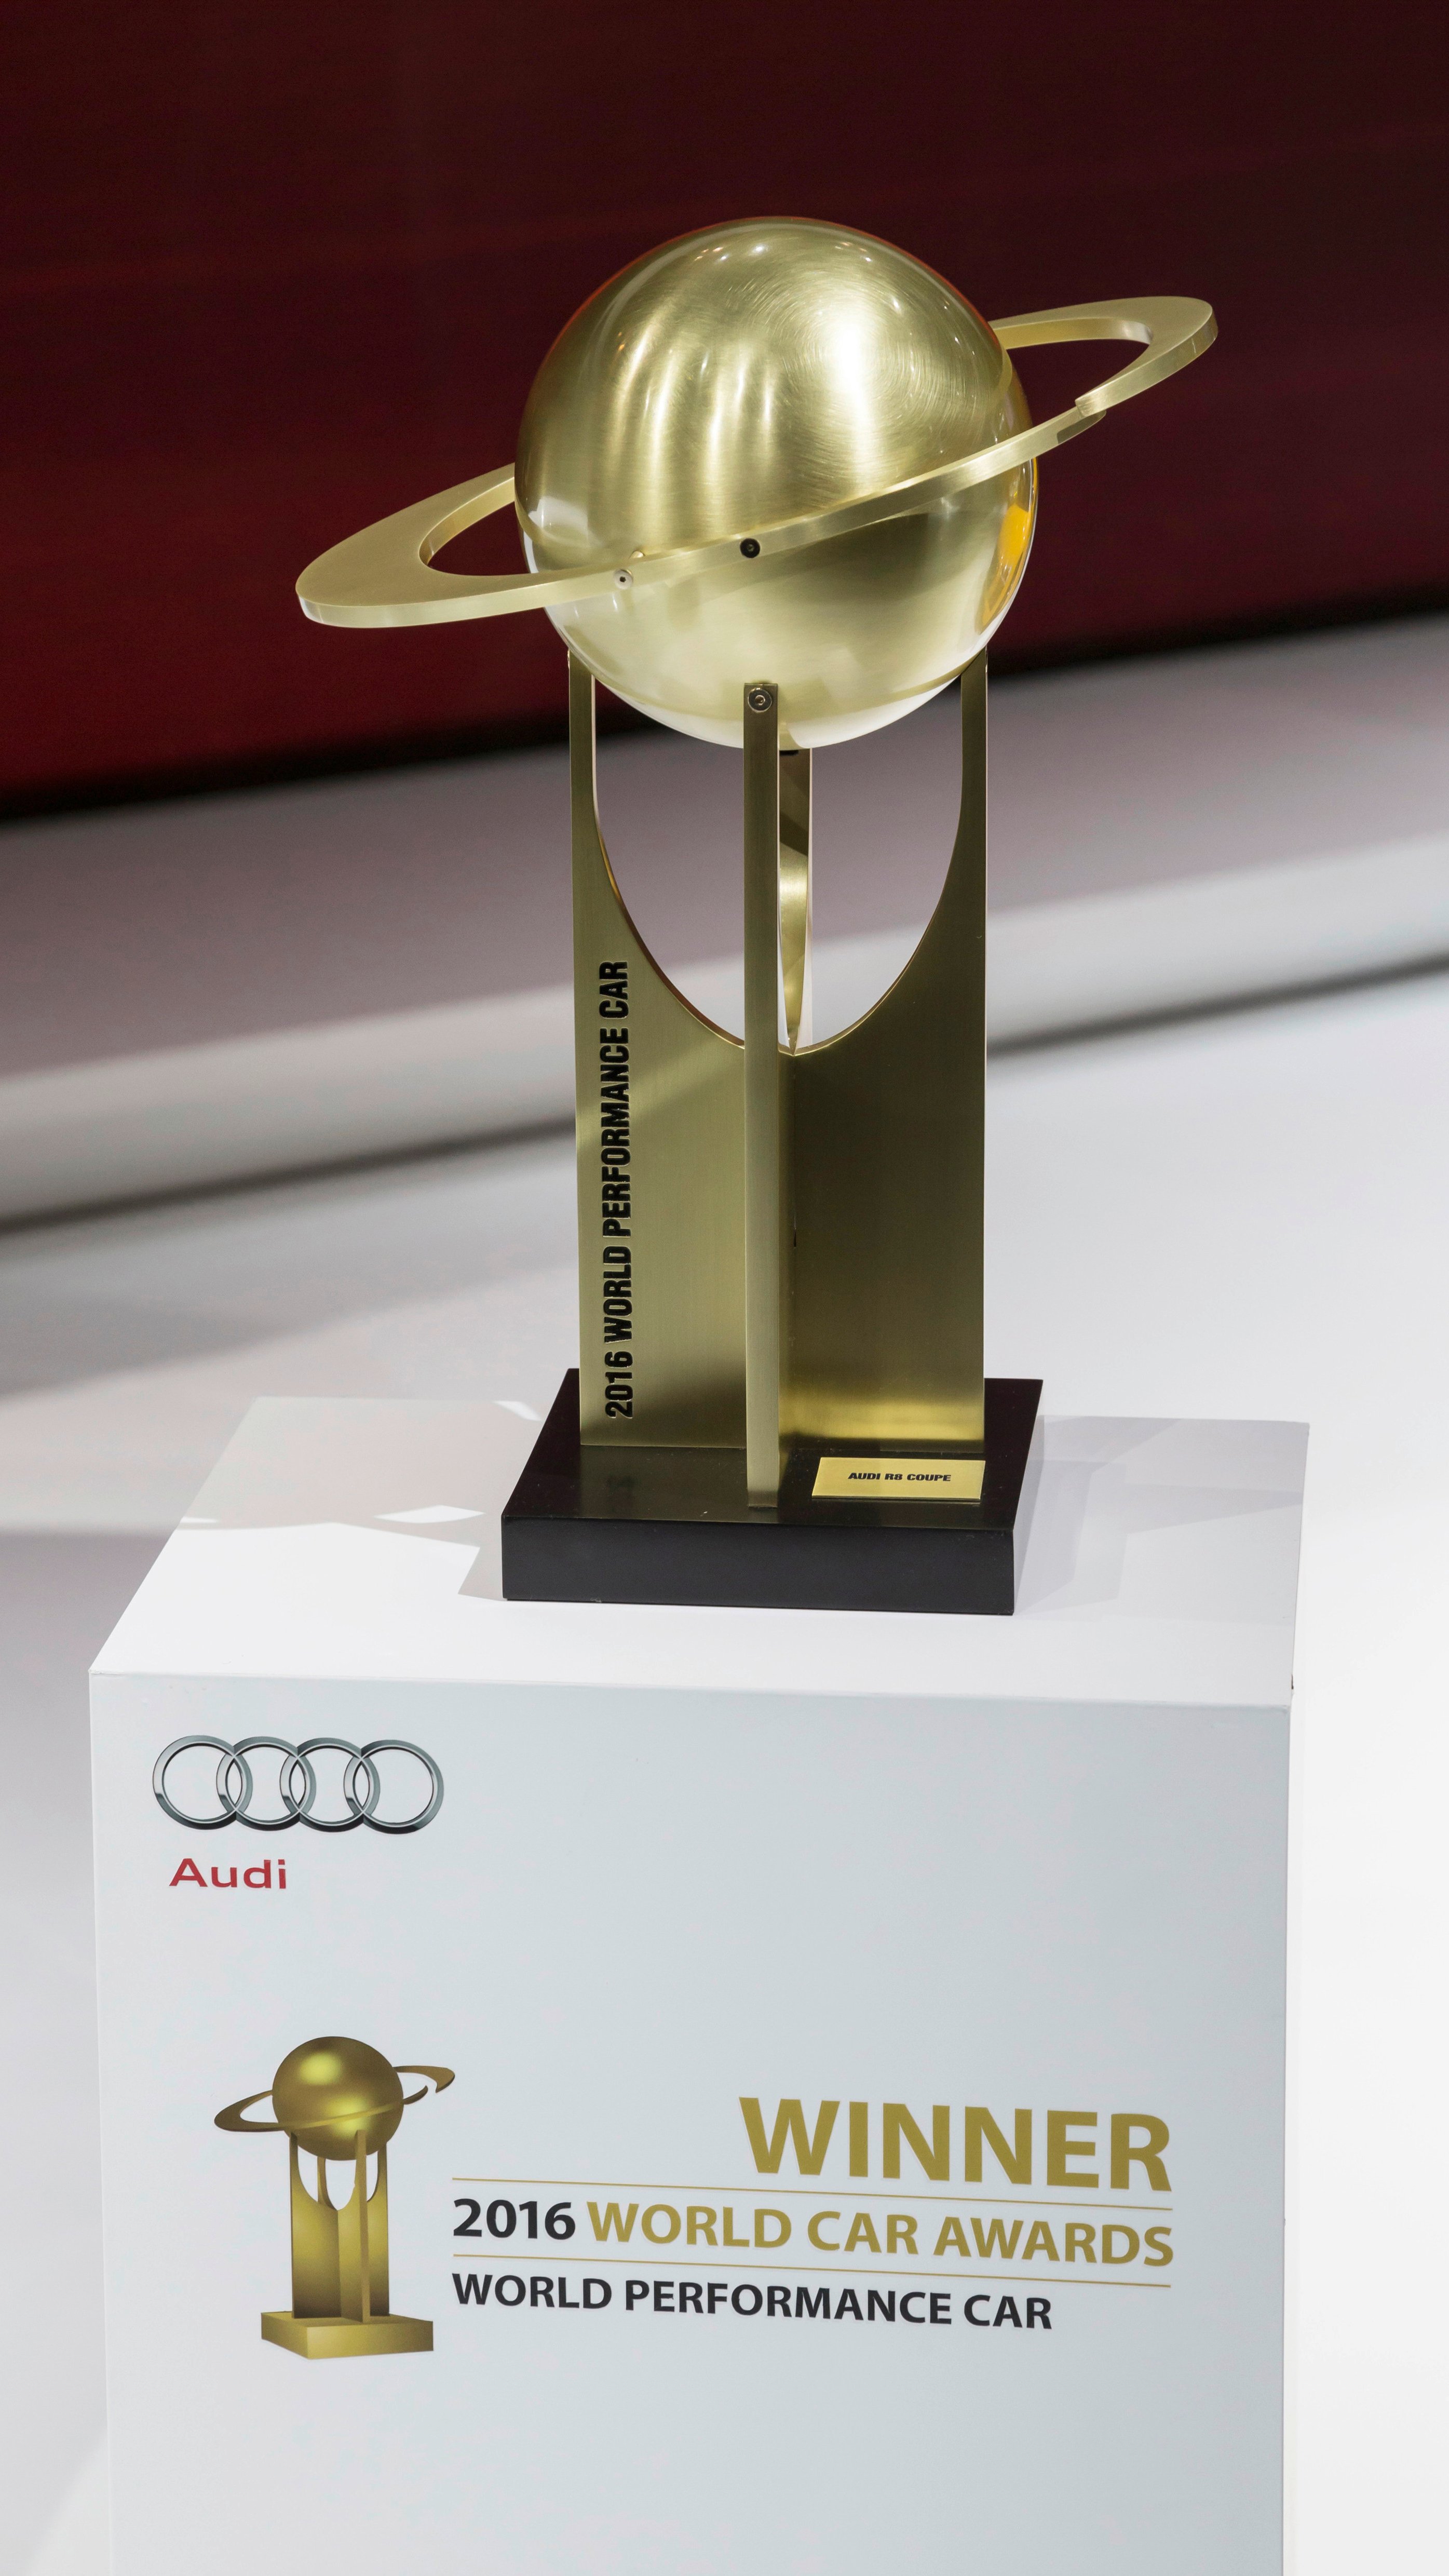 Audi R8 is the 2016 World Performance Car © Volkswagen AG